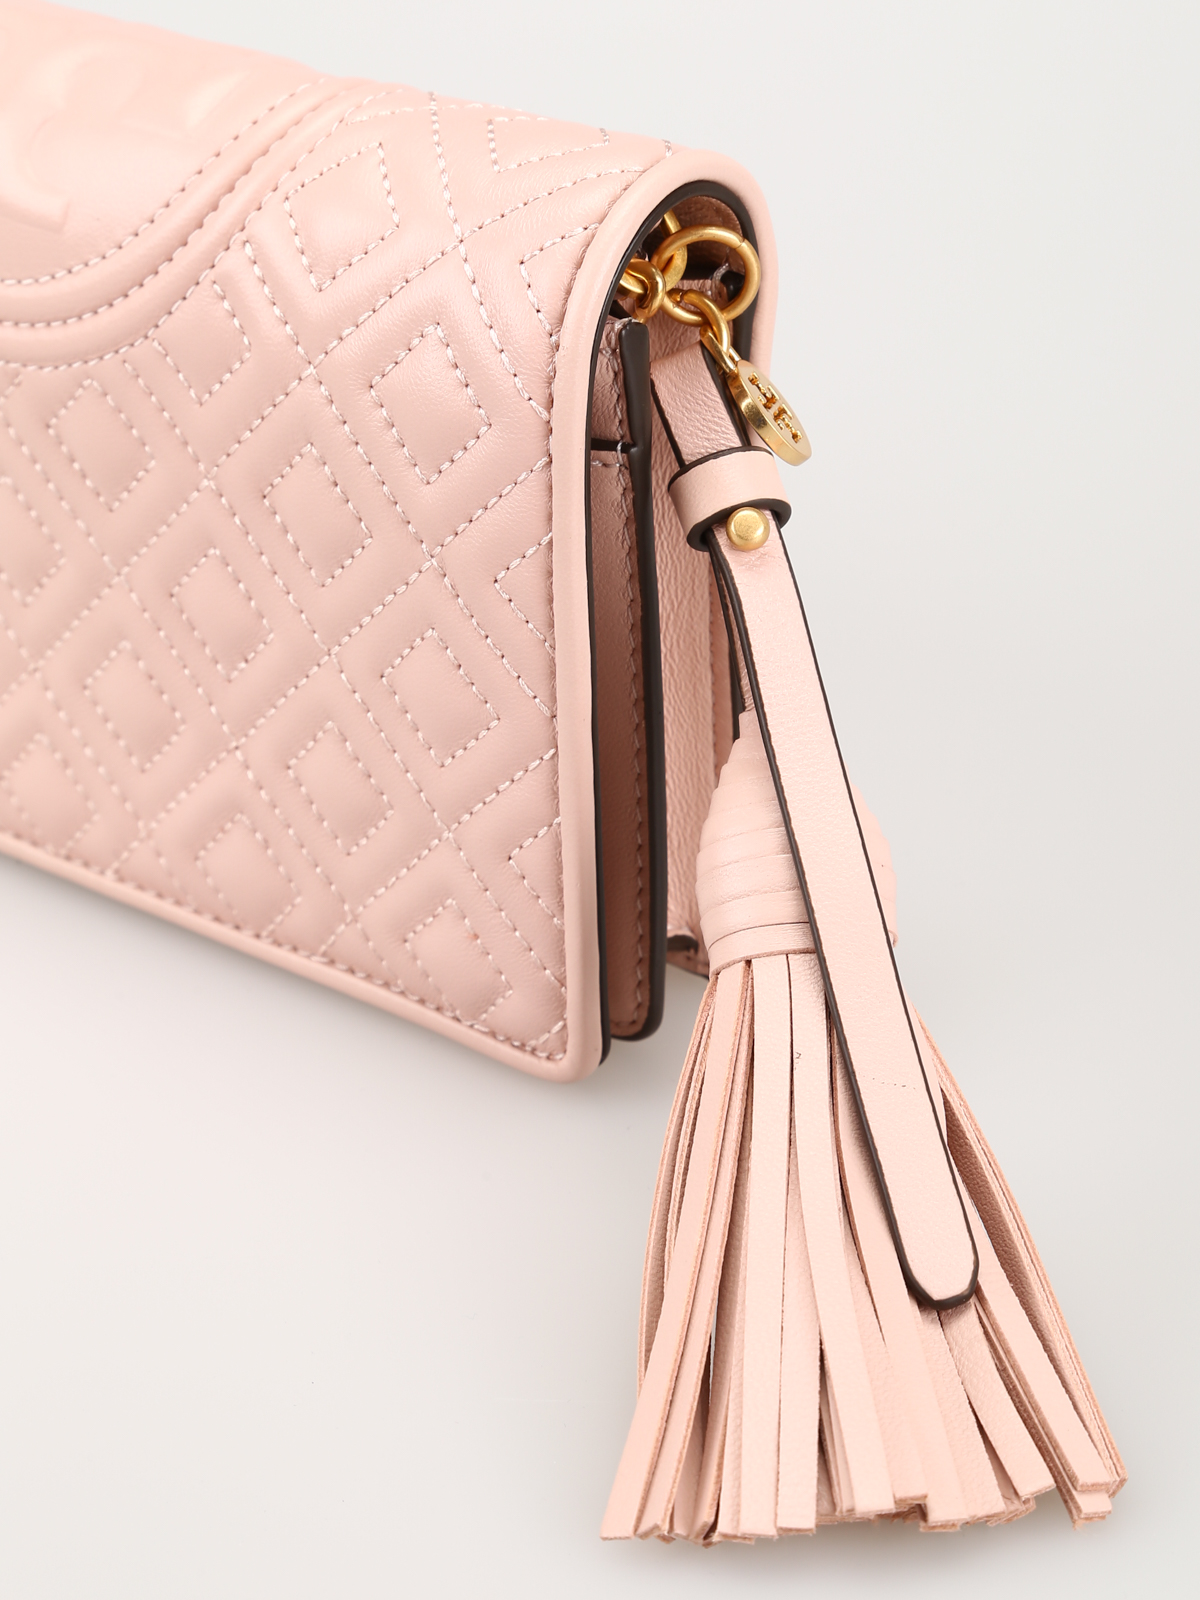 Tory Burch Shoulder Bag In Quilted Leather in Pink